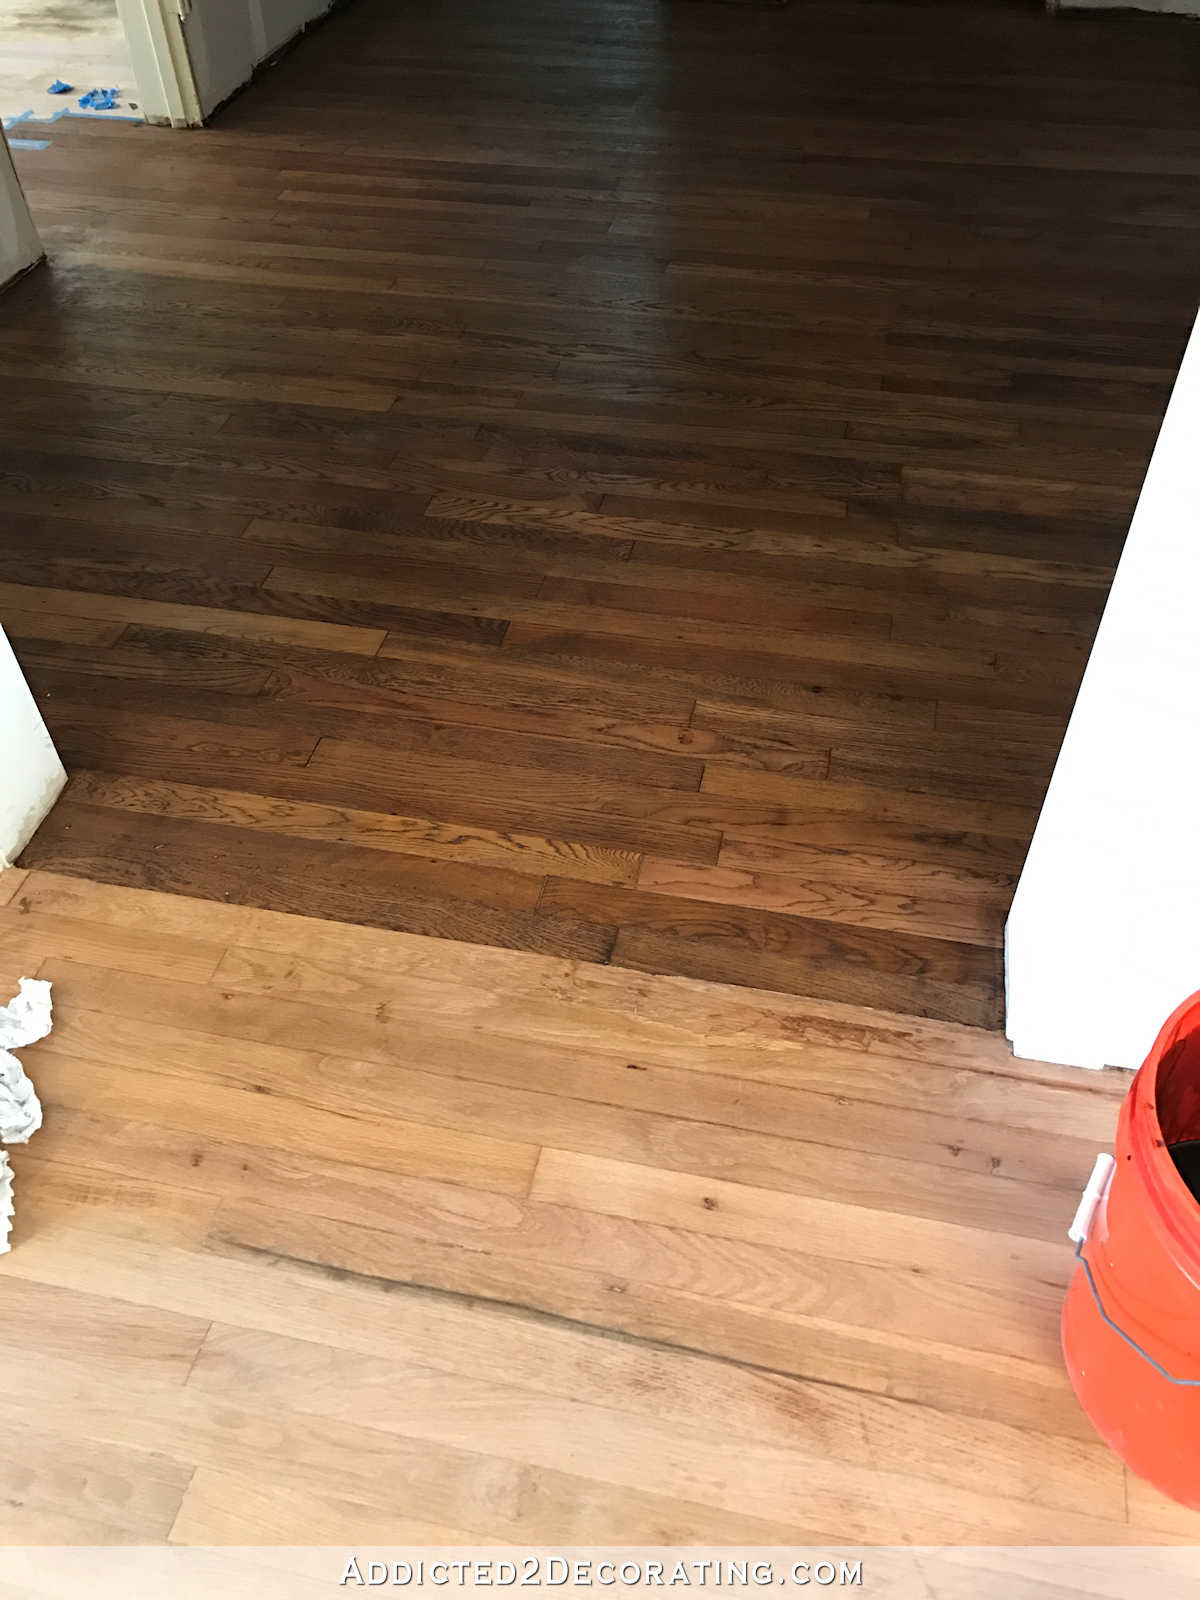 17 attractive Sanding Hardwood Floors before and after 2024 free download sanding hardwood floors before and after of adventures in staining my red oak hardwood floors products process regarding staining red oak hardwood floors 2 tape off one section at a time for